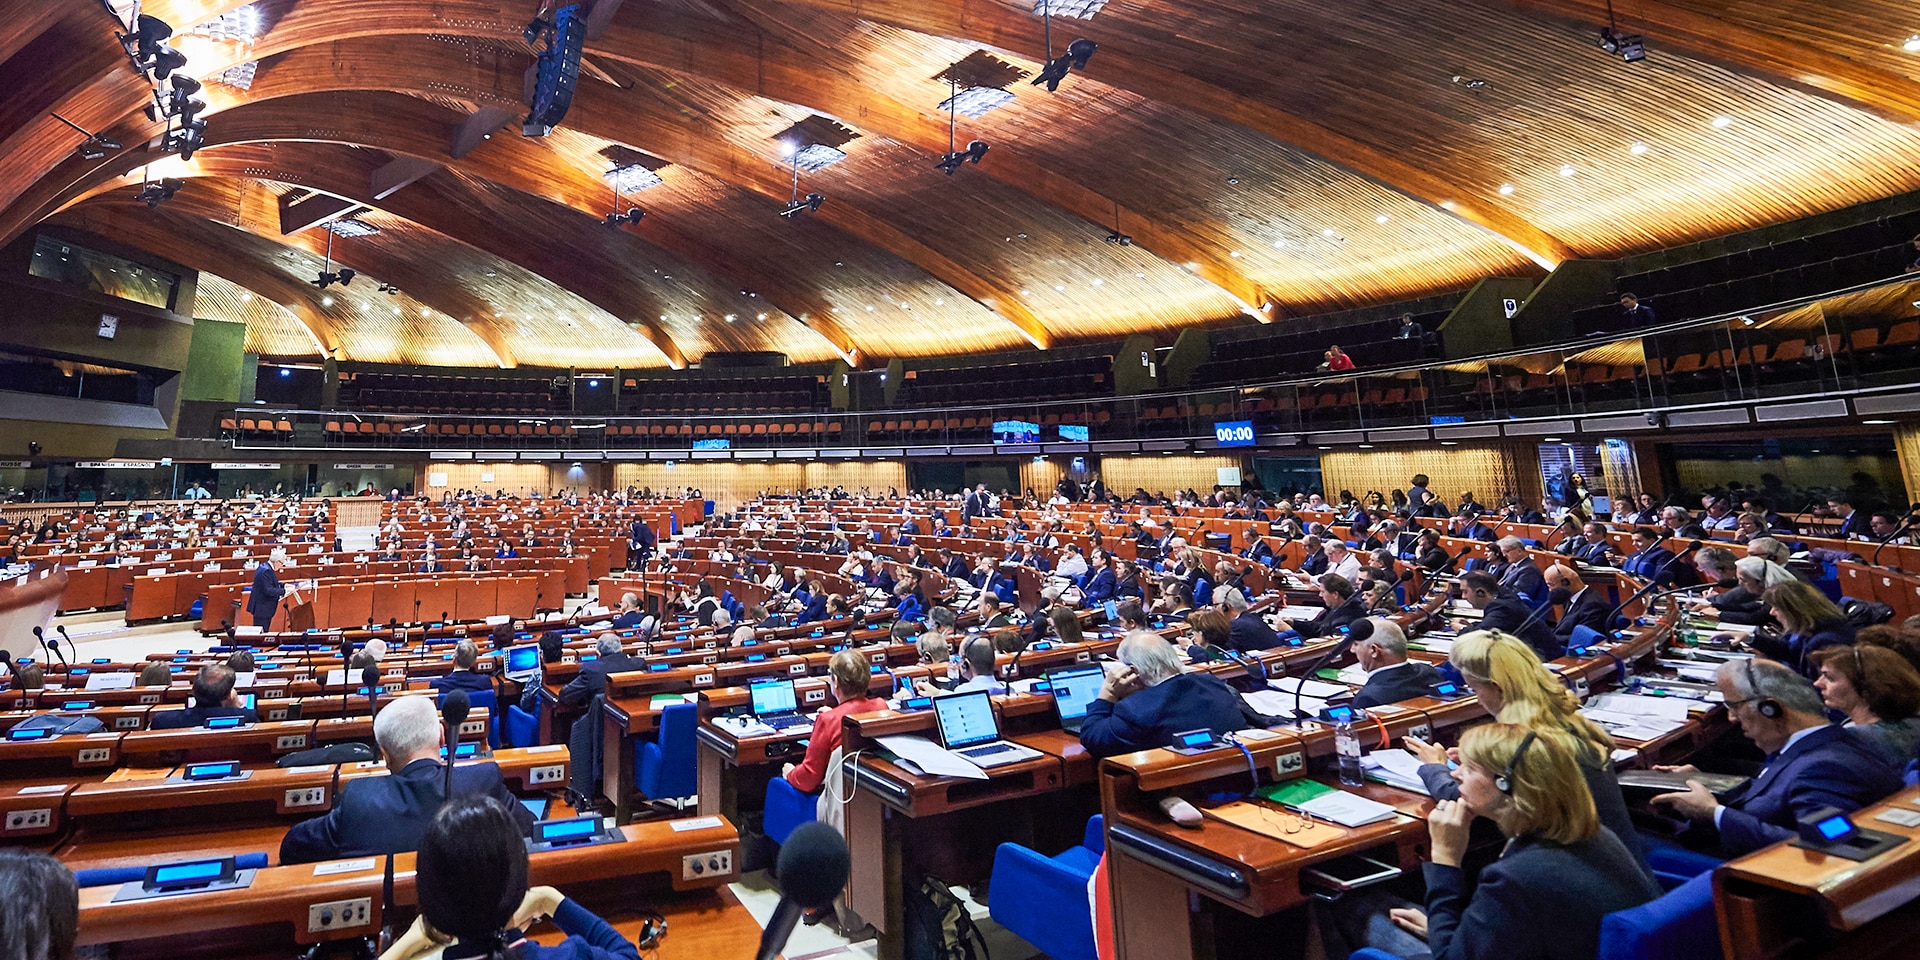 A large hall with a wooden roof construction and rows of seats in a semicircle where the members of the Council of Europe’s Parliamentary Assembly sit.